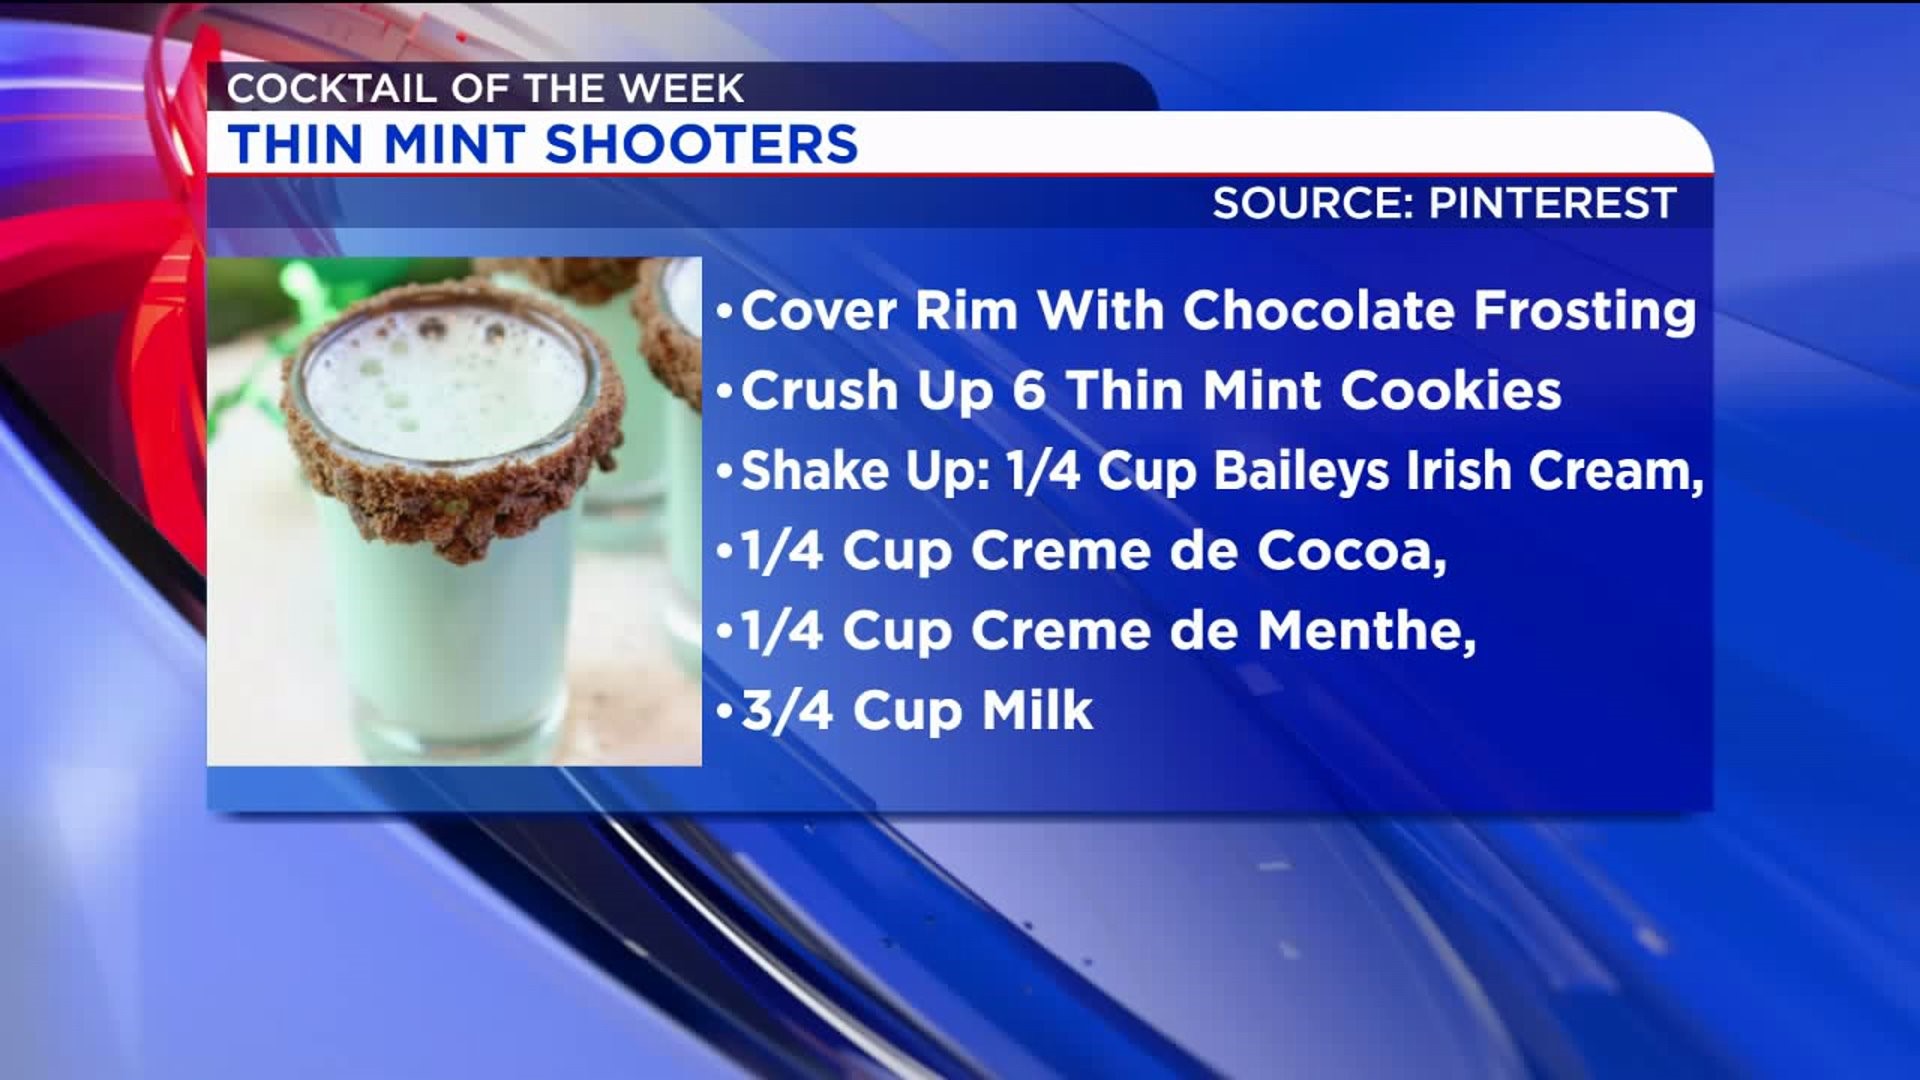 COCKTAIL OF THE WEEK: Thin Mint Shooters